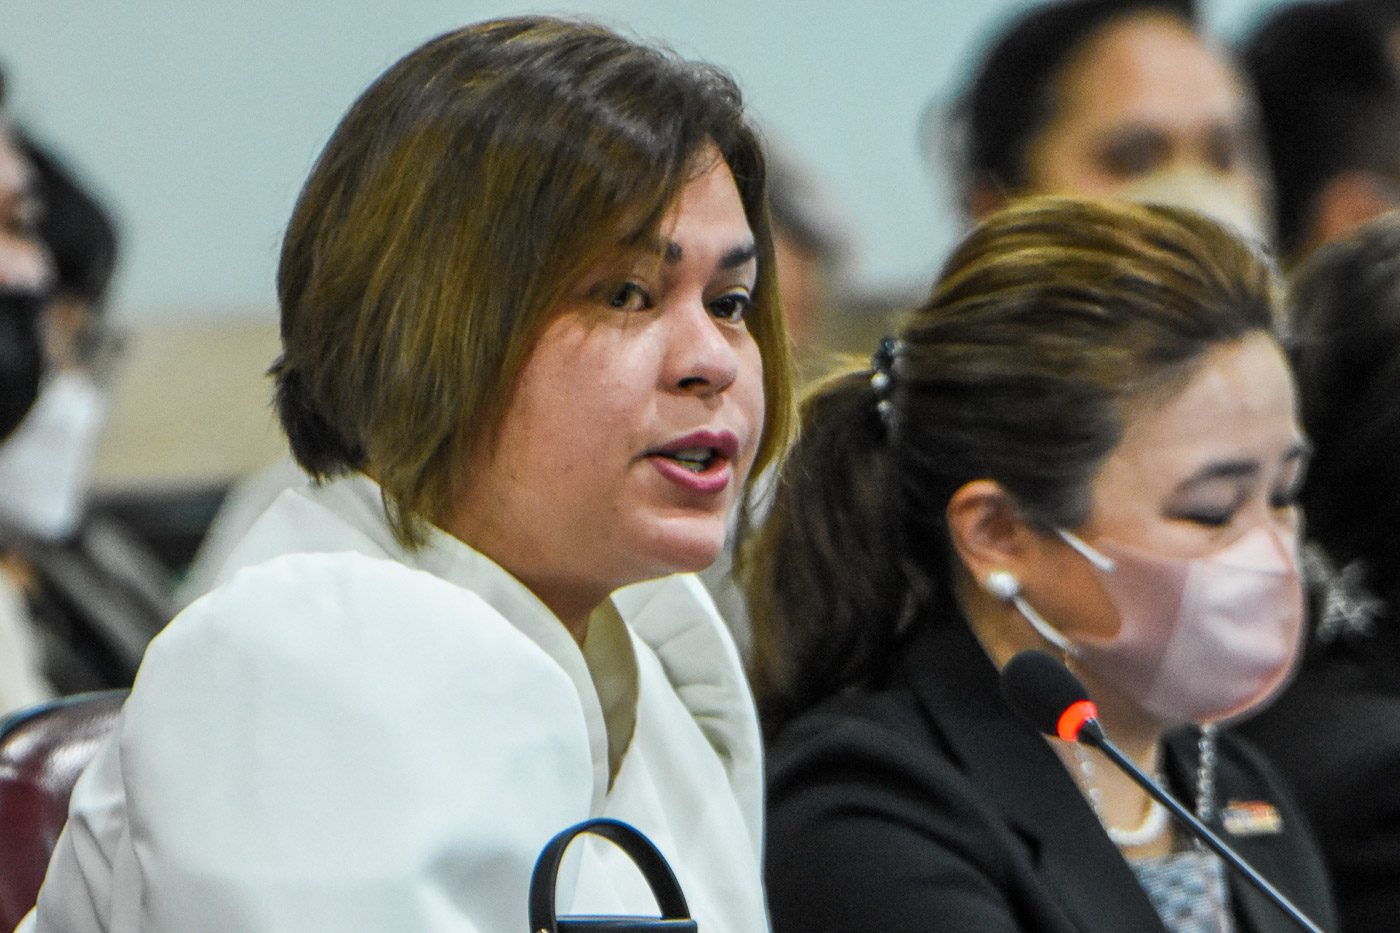 Sara Duterte tells Marcos, Congress: Give me P100B, I’ll fix education in 6 years